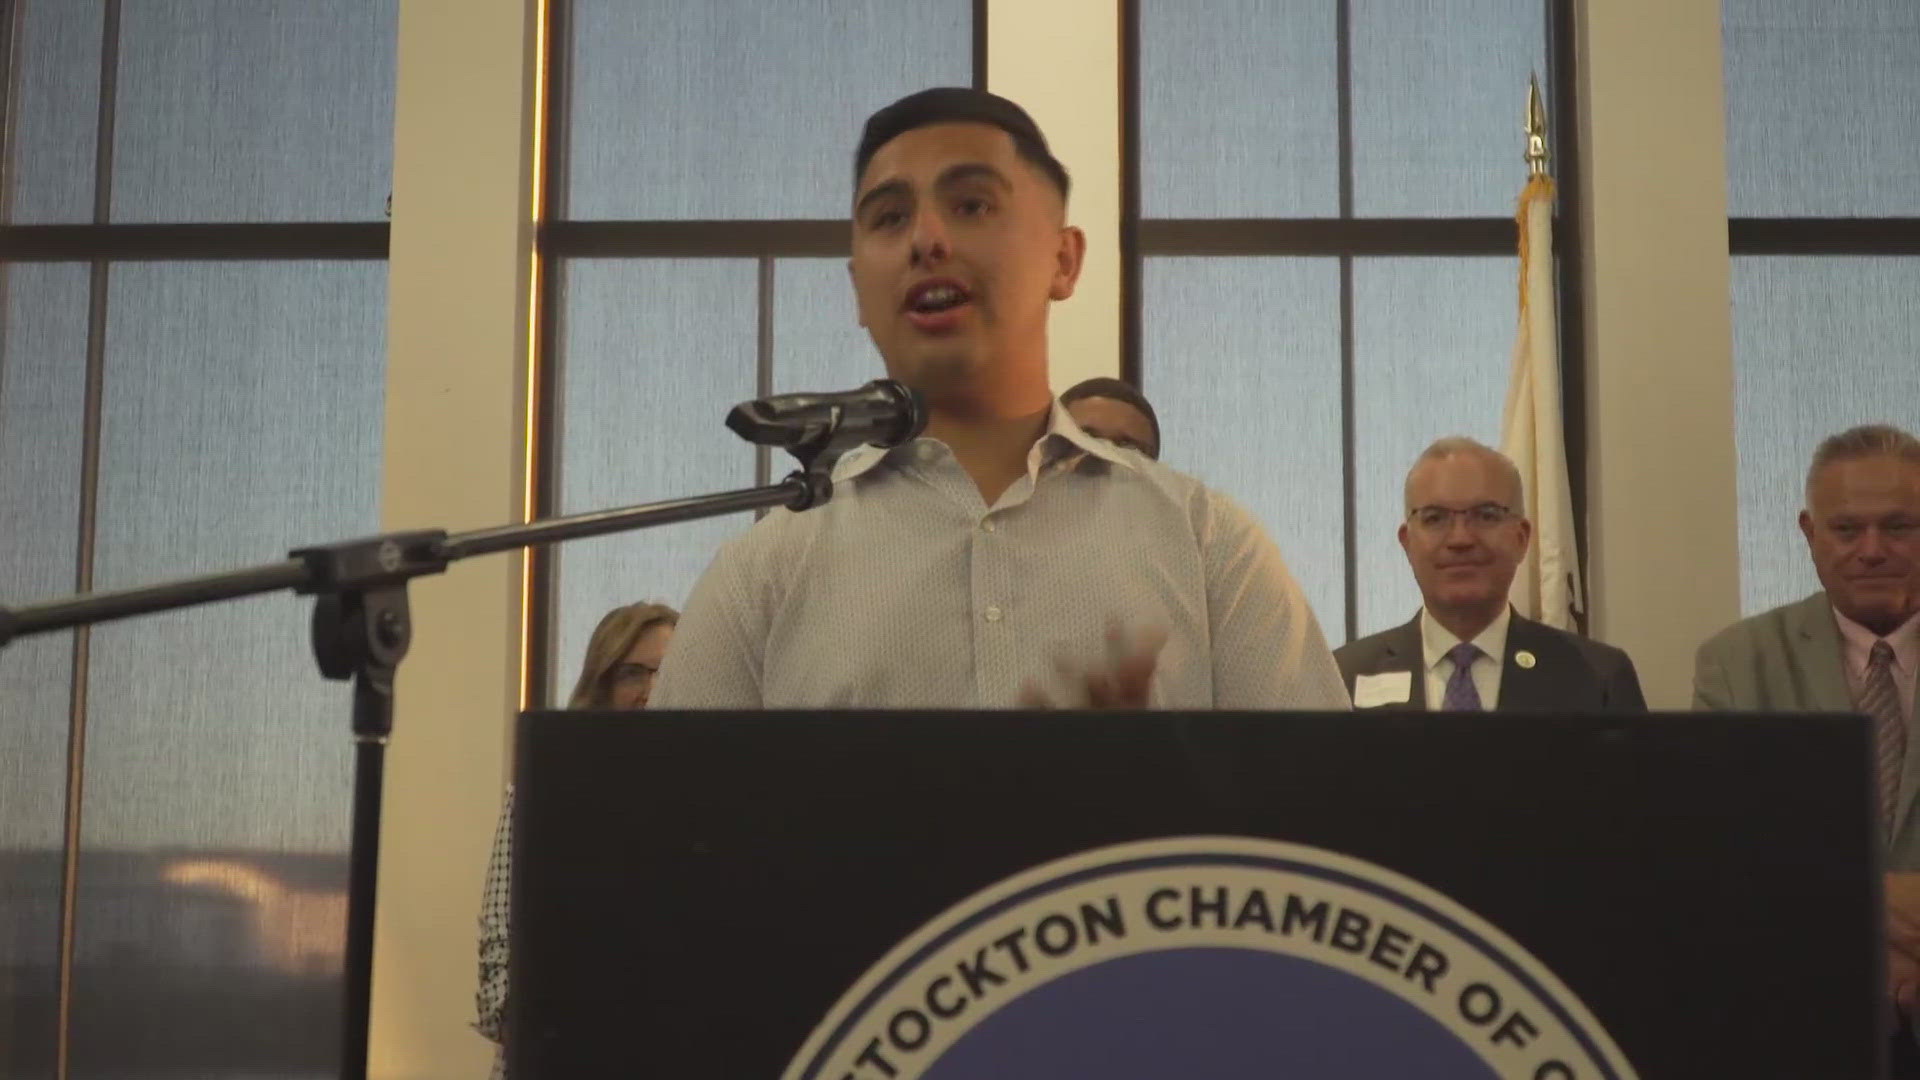 "Receiving this award is really heartwarming to me as it is a show of support from the community that raised me," ABC10 reporter Gabiel Porras said.